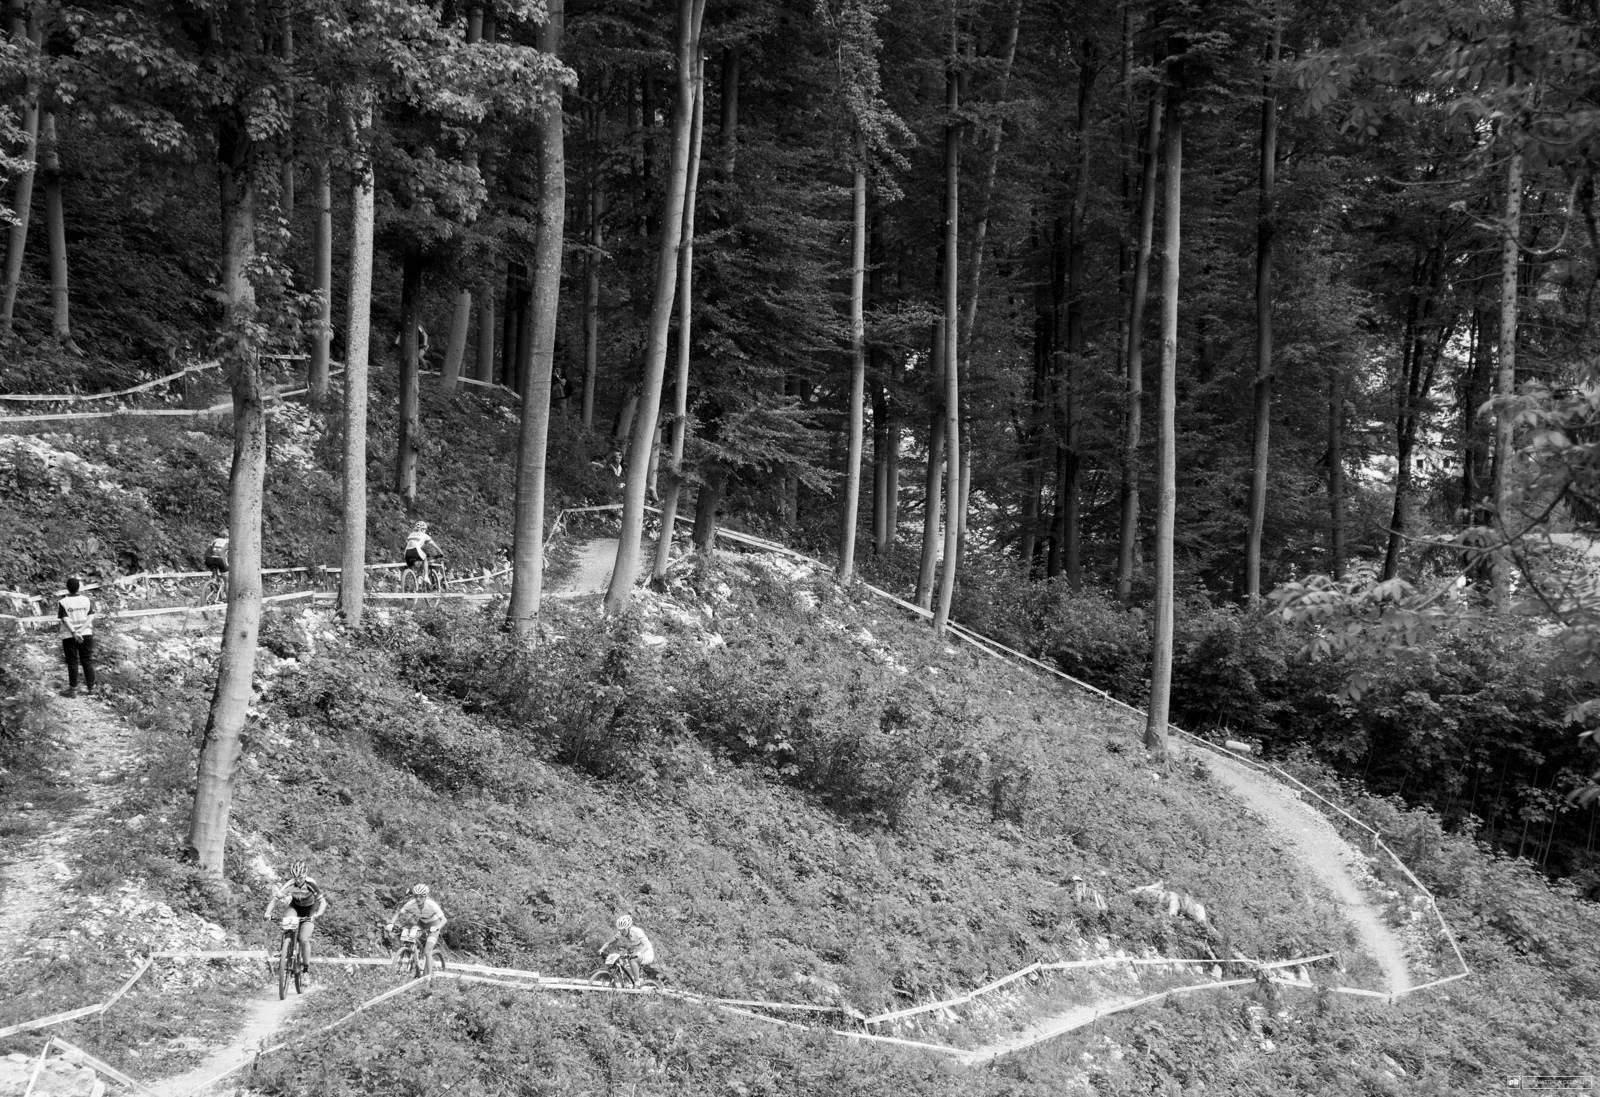 Compared to Nove Mesto the pace of this race was off the charts. The speed is even more impressive when all the climbing is considered.